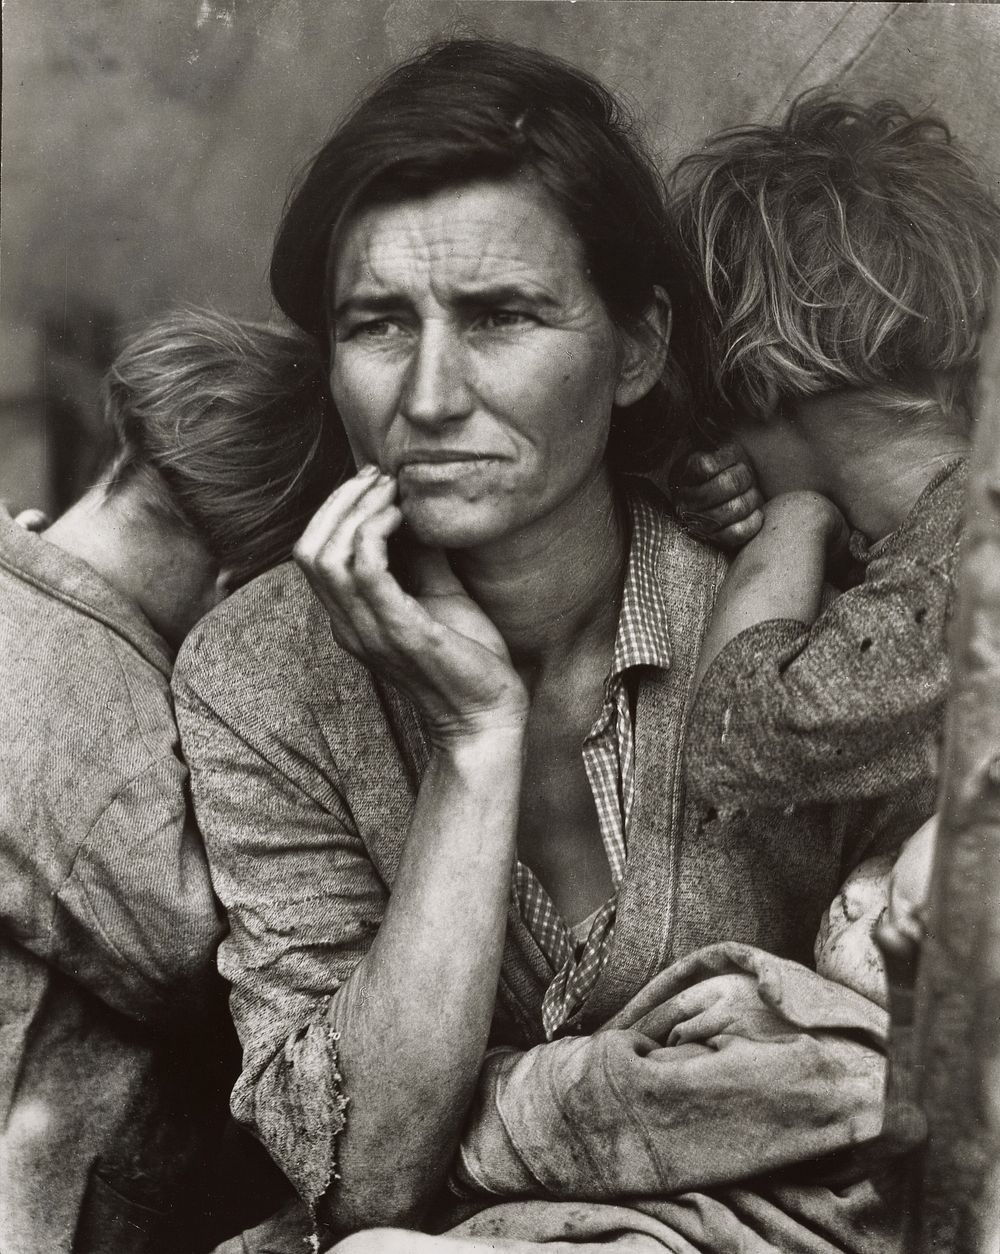 Copy print of Migrant Mother, Nipomo, California by Dorothea Lange and Arthur Rothstein